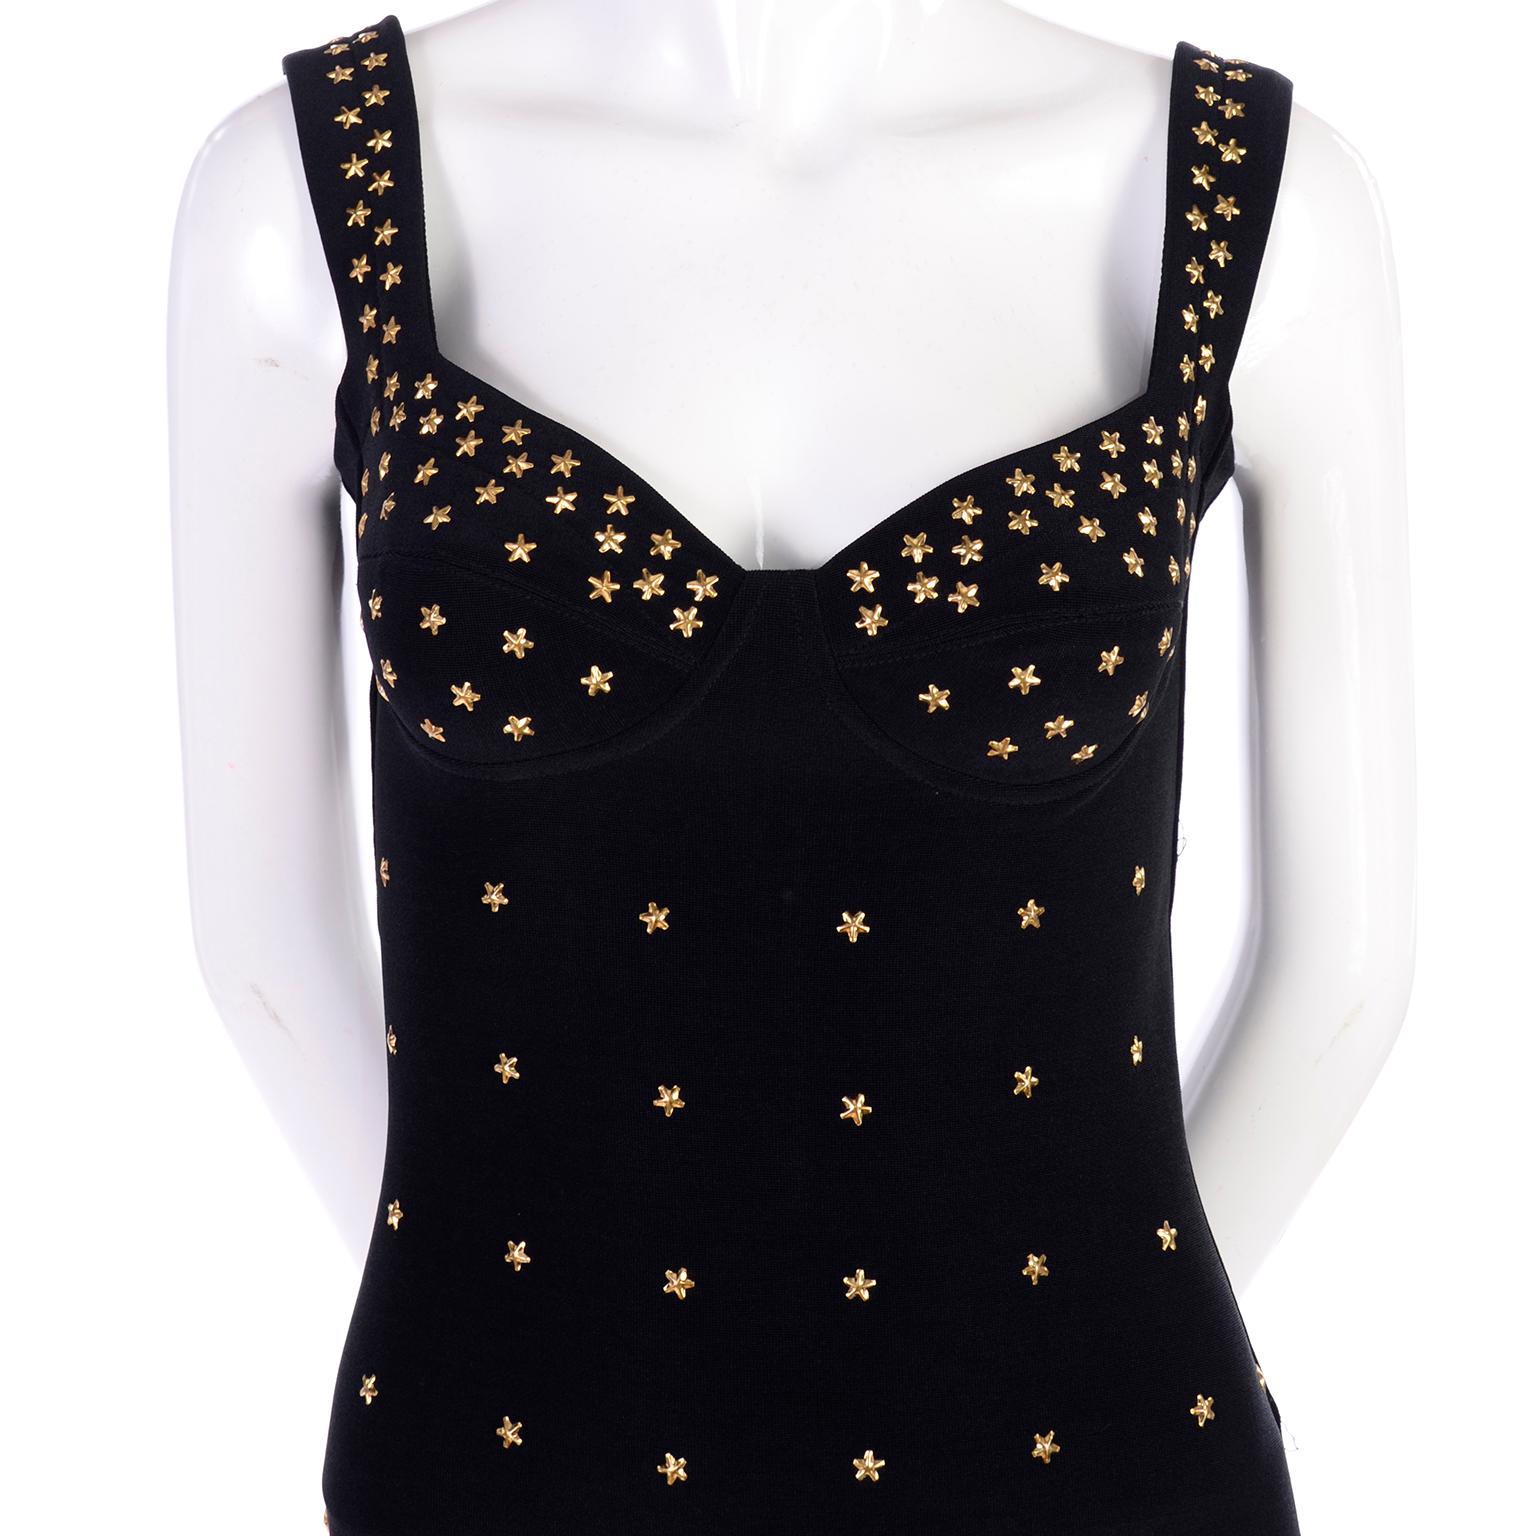 This is a fabulous Tadashi Shoji black stretch bodycon mini dress with gold star studs. The dress is reminiscent of Versace and we love the way the dress is fitted and cut with a low, scoop back. Slips overhead with no closures. We estimate this